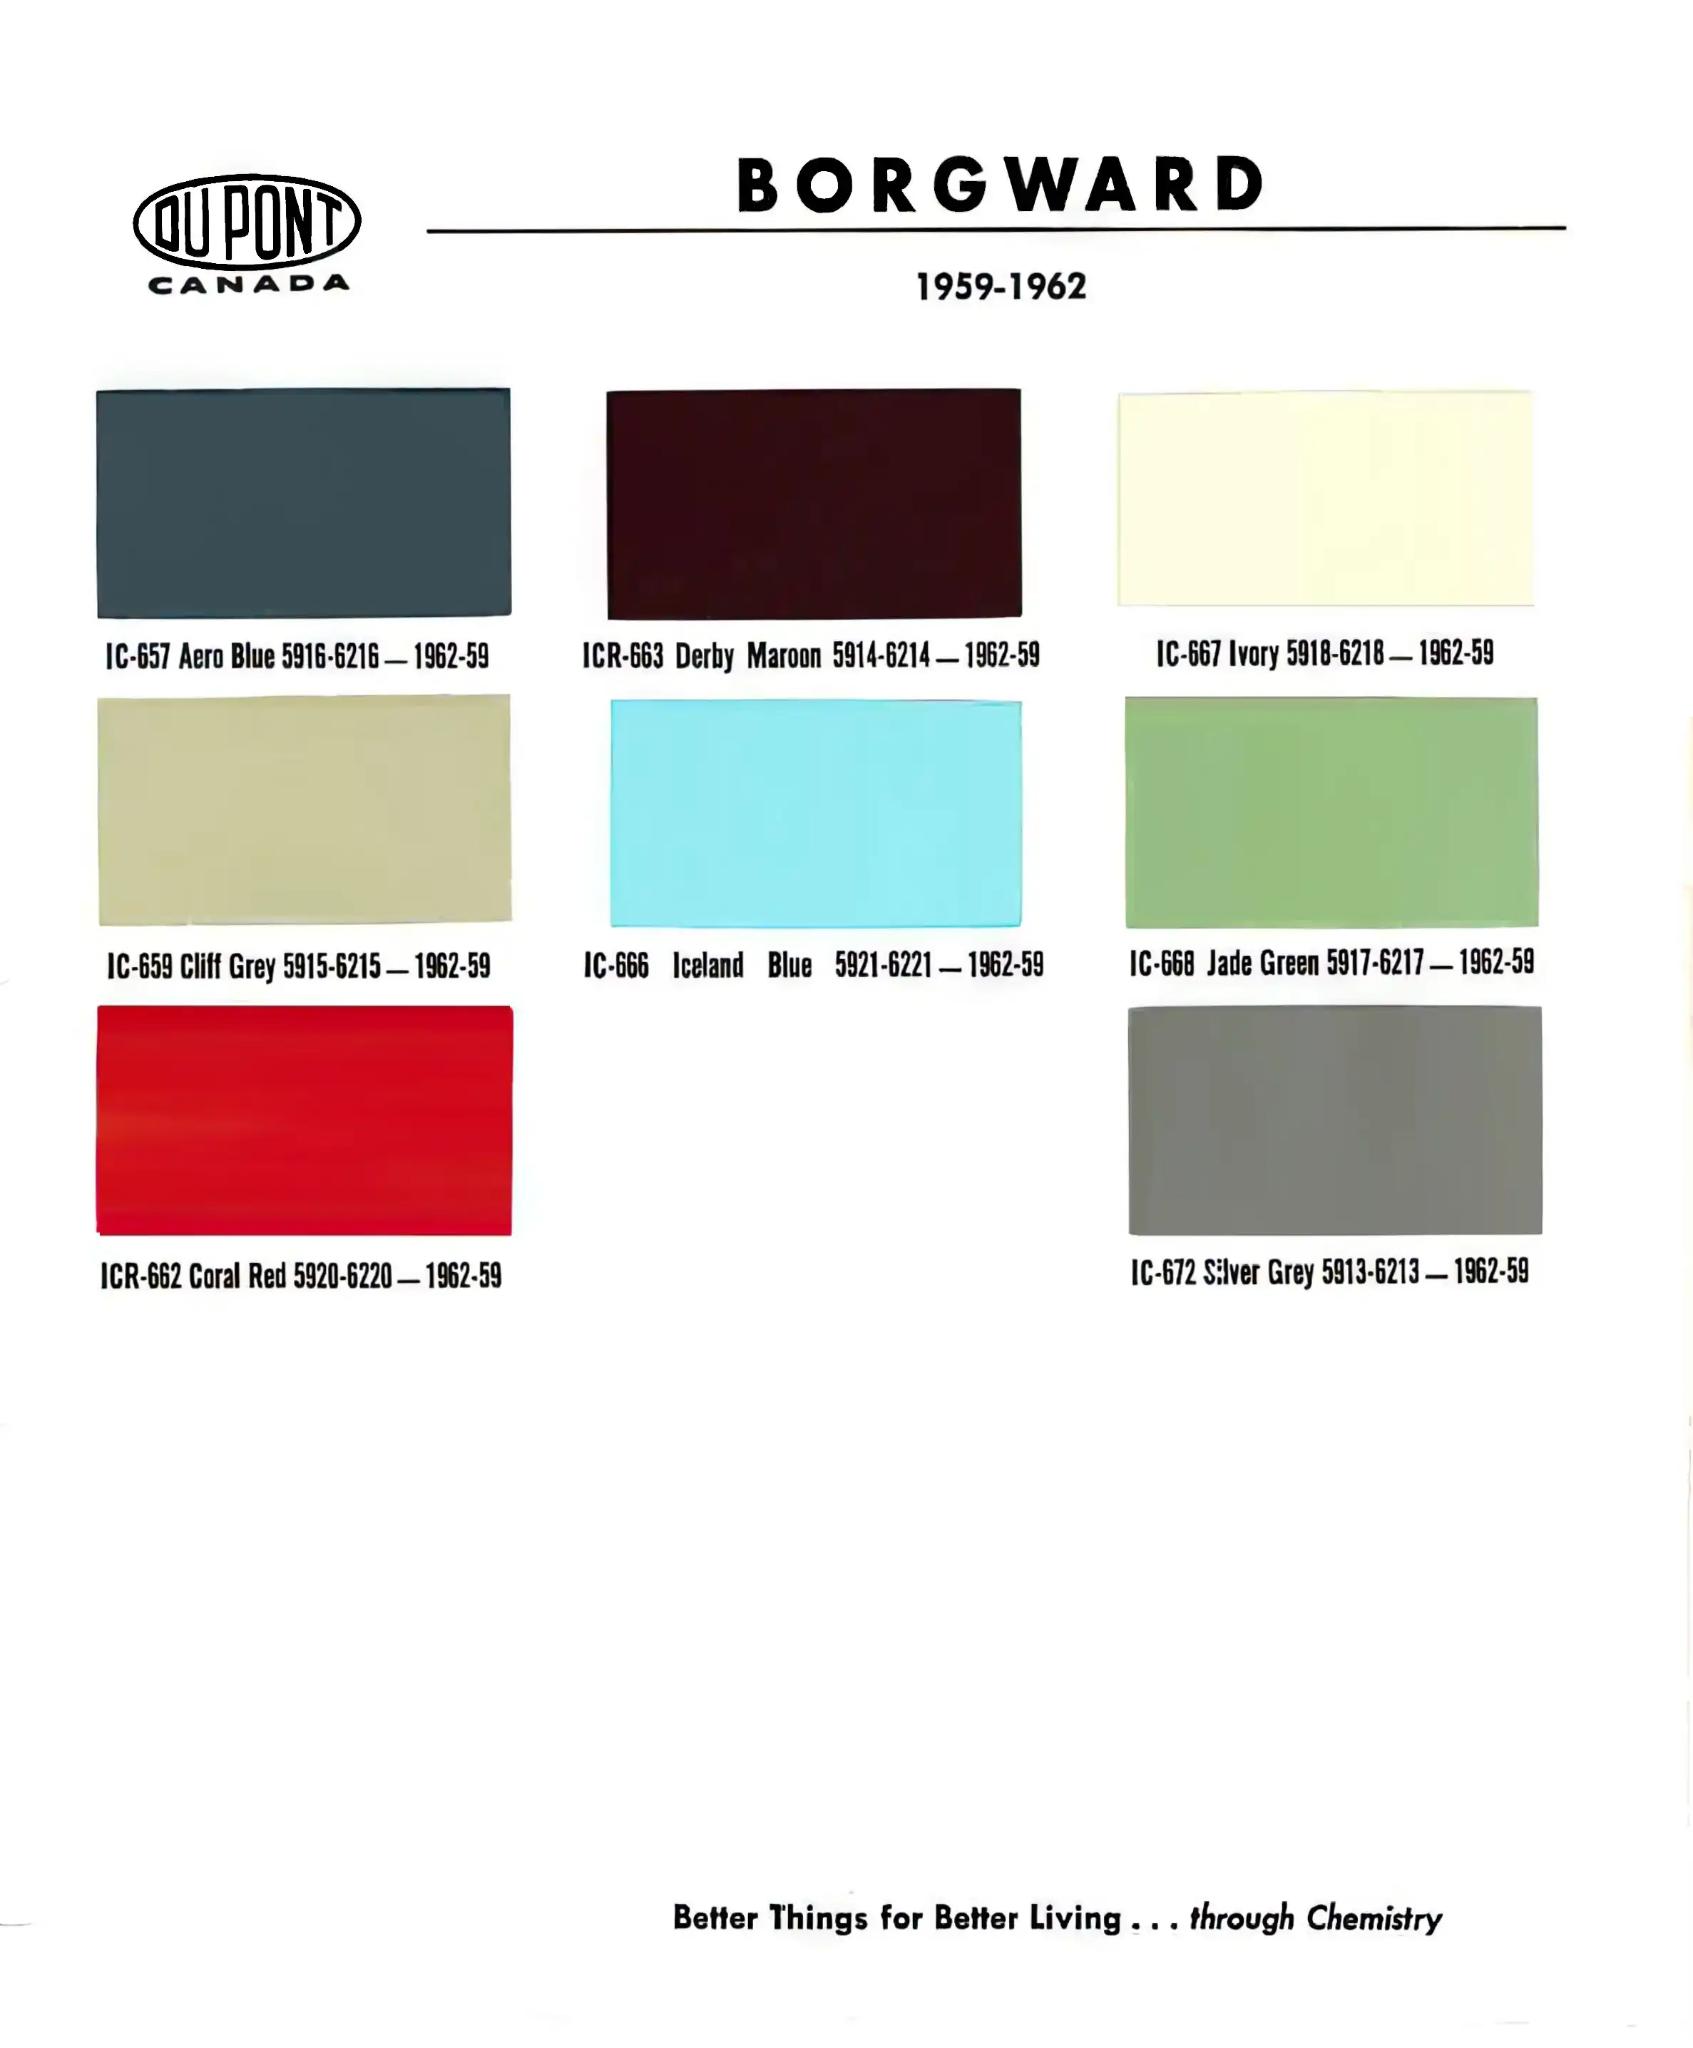 a paint chart of the Borgward vehicles imported in 1959 1960 1961 and 1962, showing the exterior colors of the vehicles